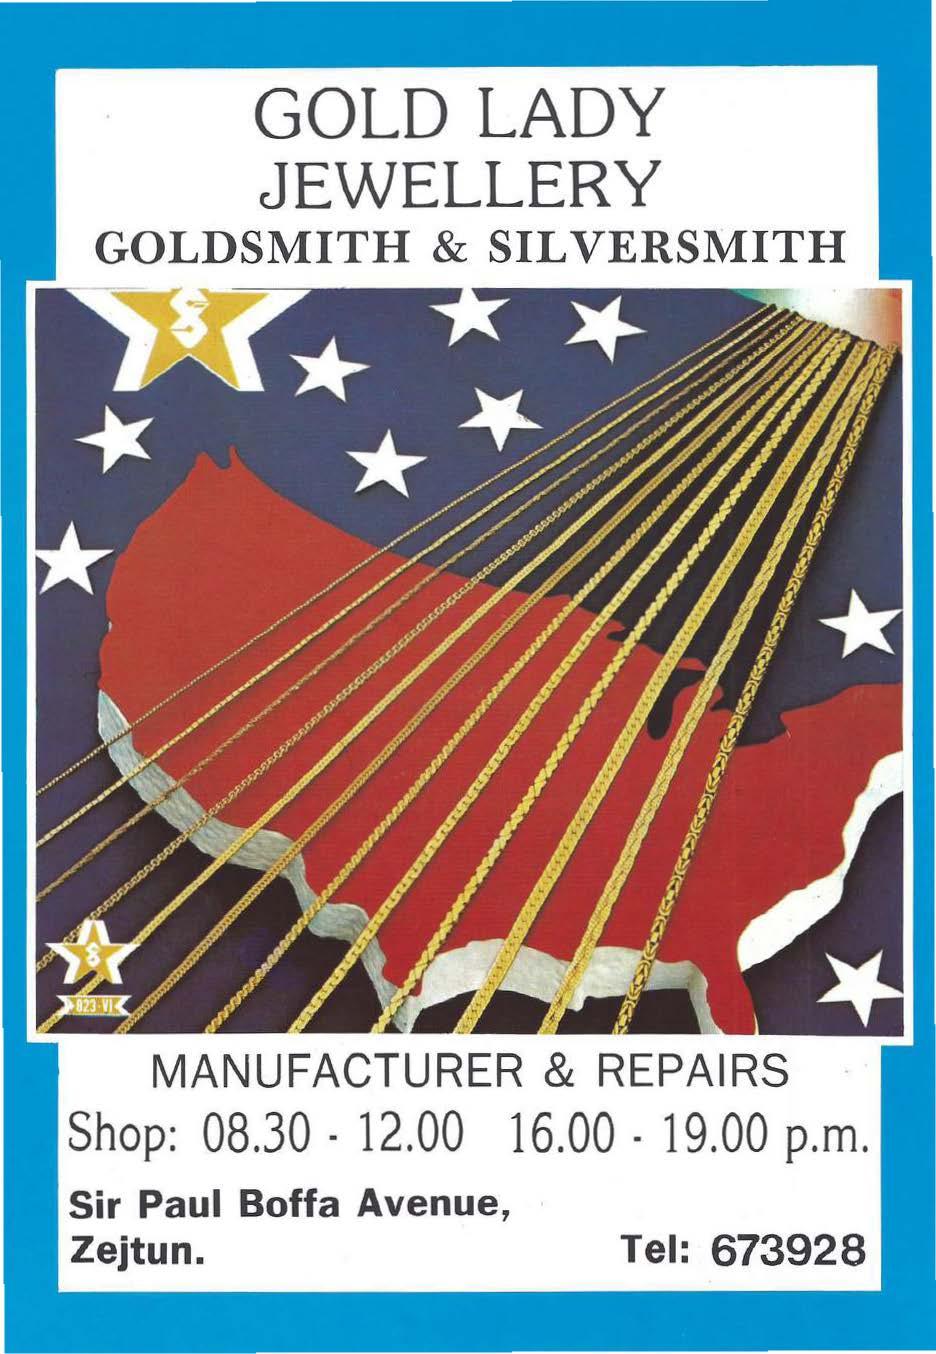 GOLD LADY JEWELLERY GOLDSMITH & SIL VERSMITH MANUFACTURER & REPAIRS